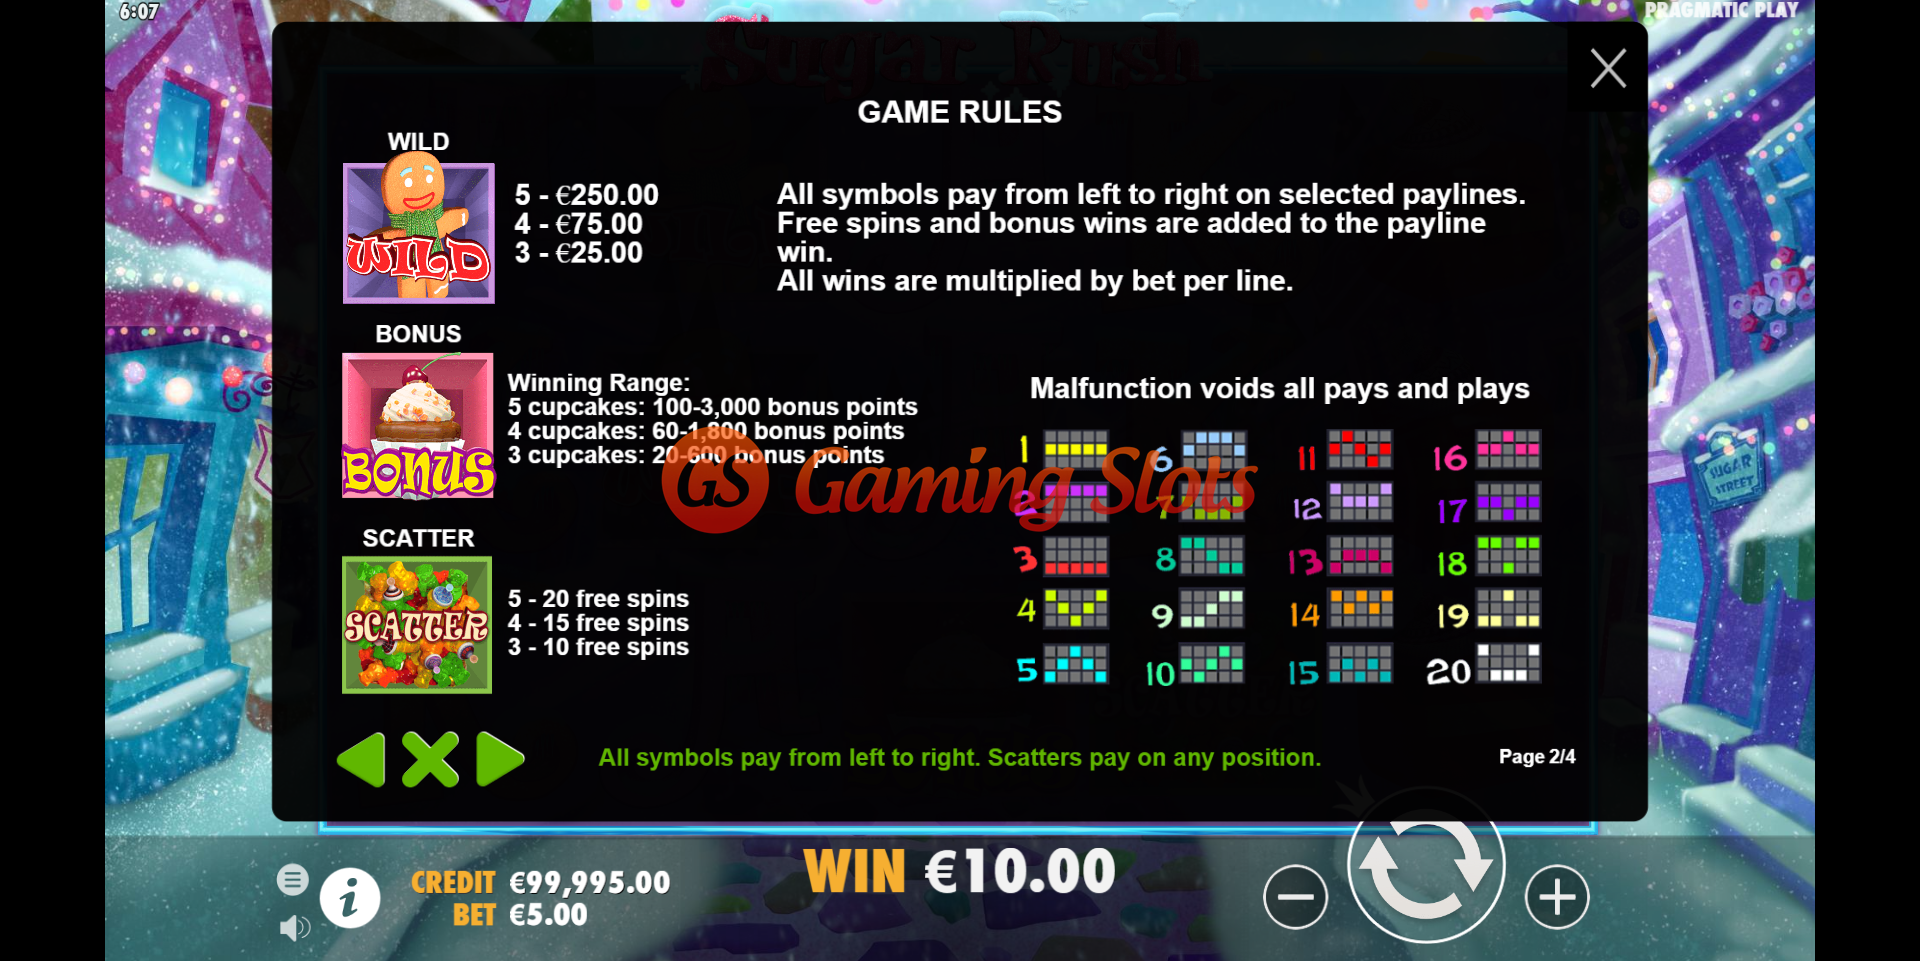 Game Rules for Sugar Rush Winter slot from Pragmatic Play